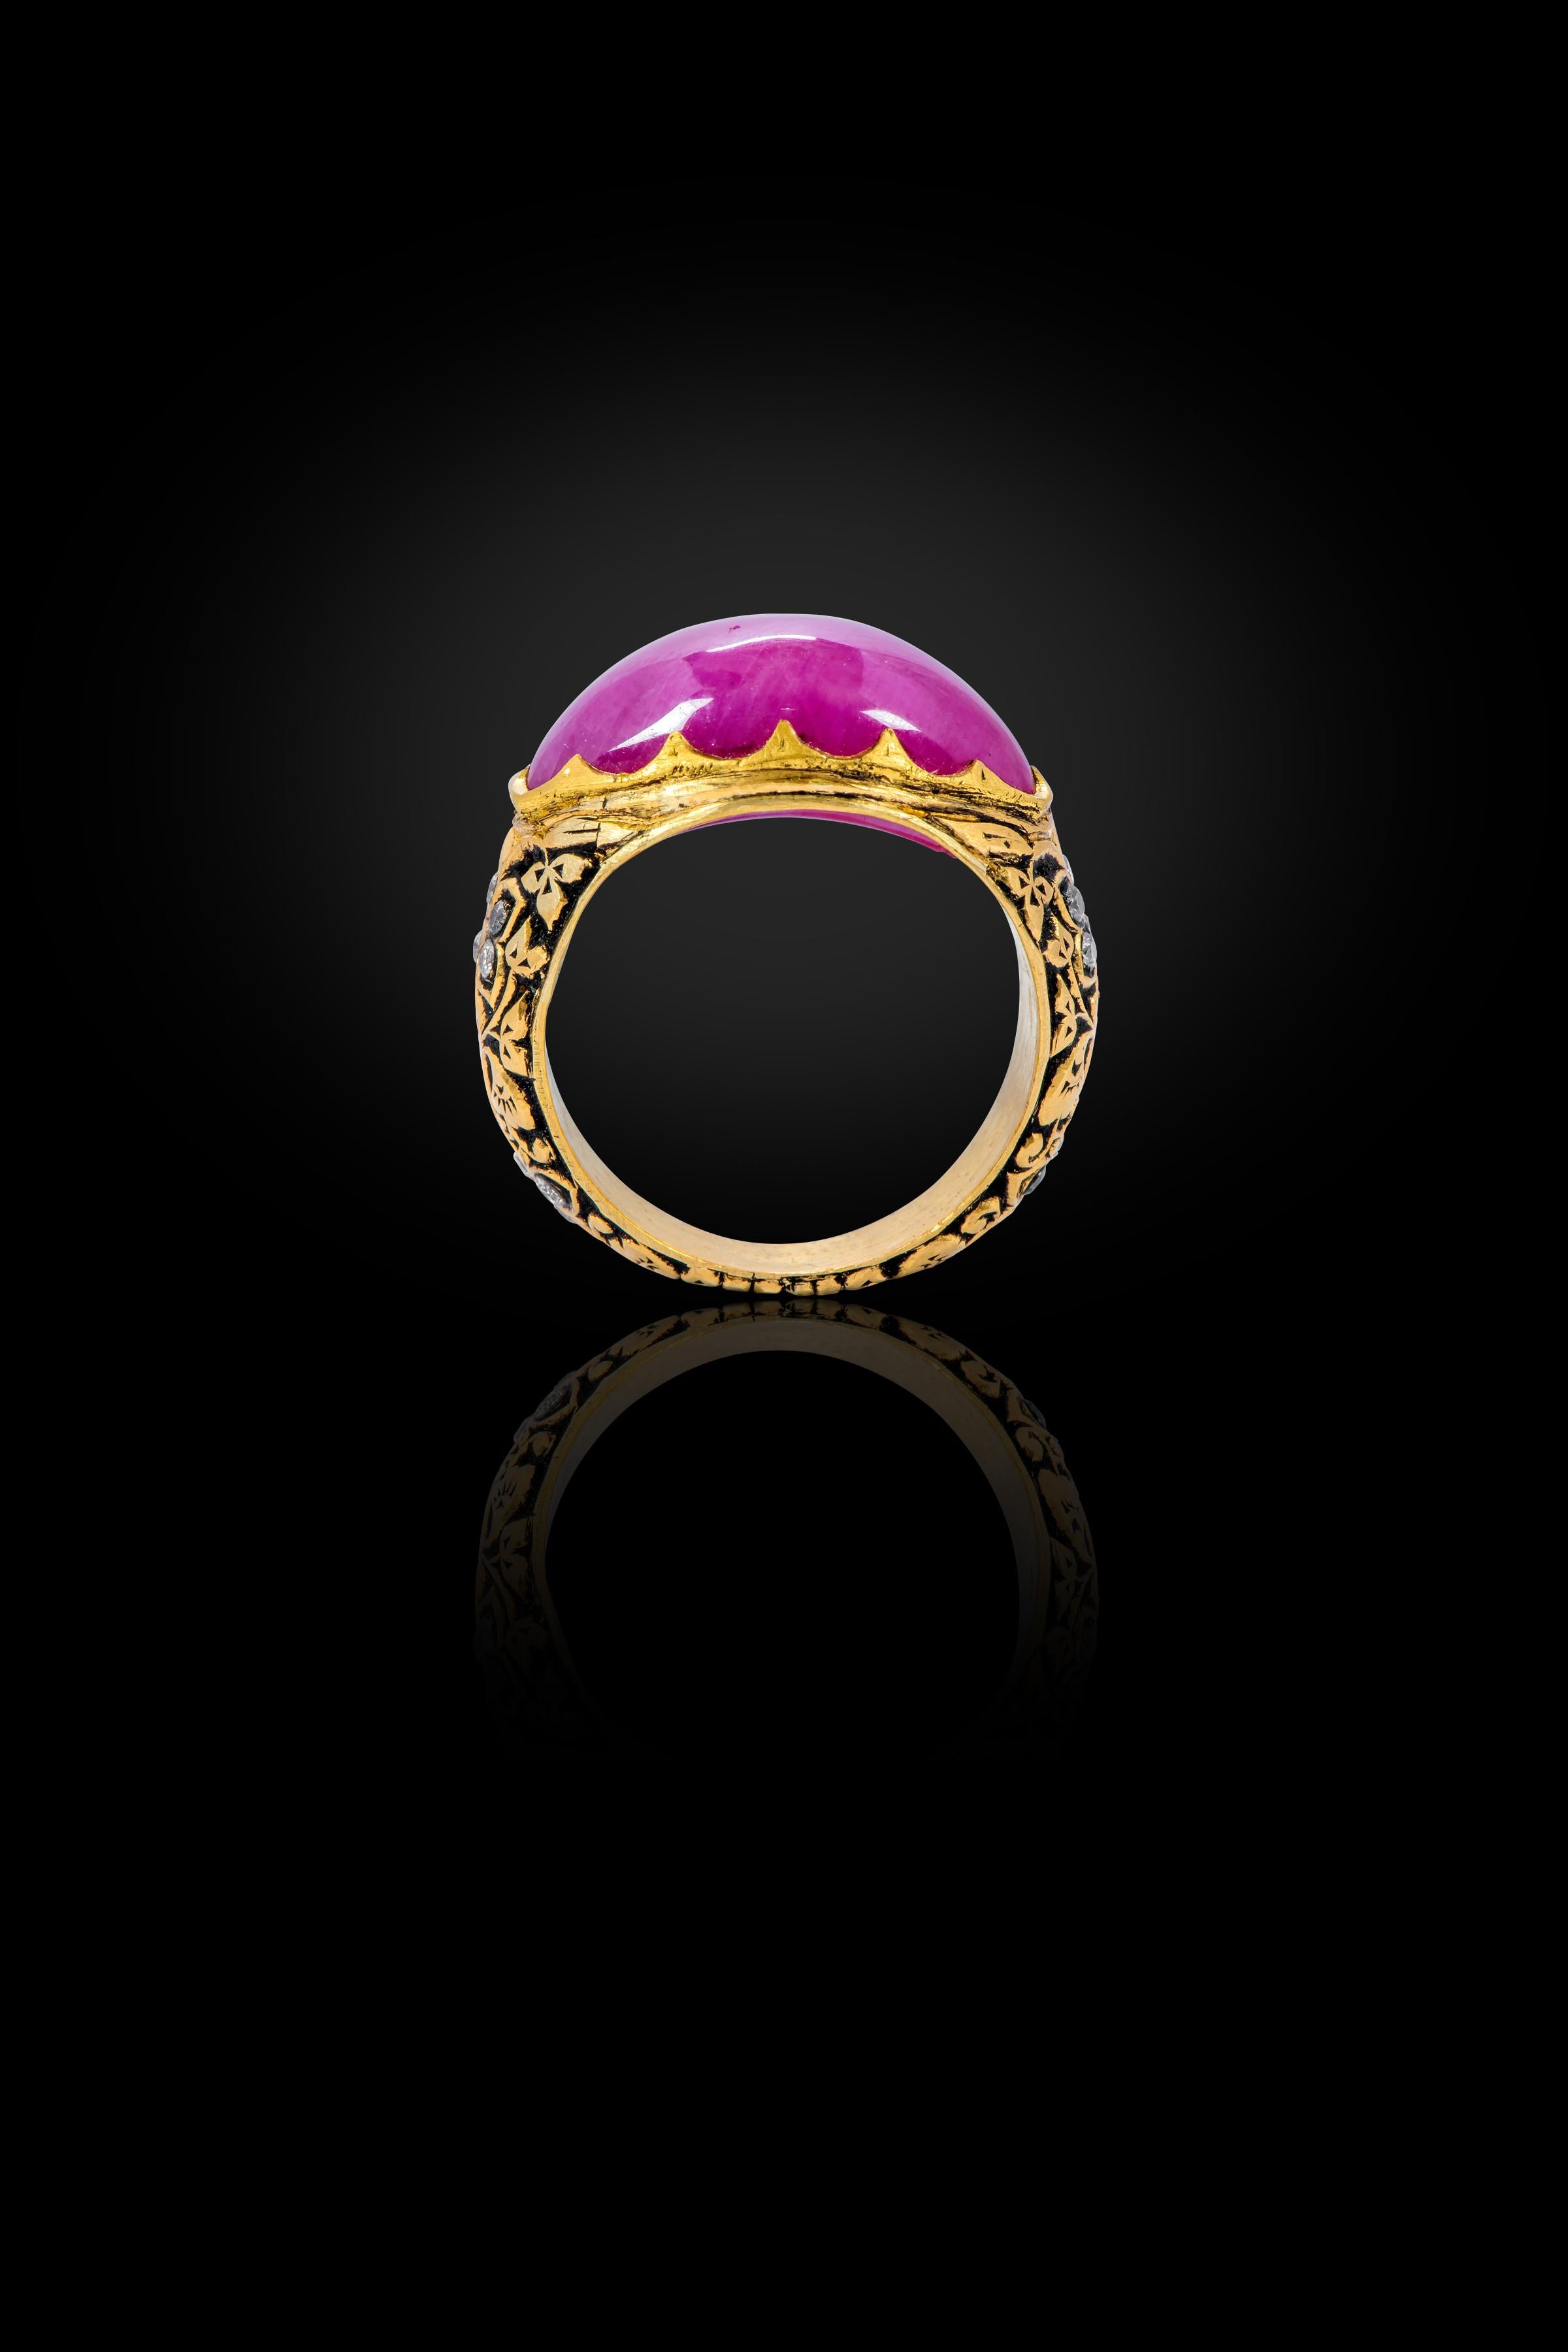 22 Karat Yellow Gold 14.85 Carat Cabochon Ruby and Diamond Ring For Sale 3